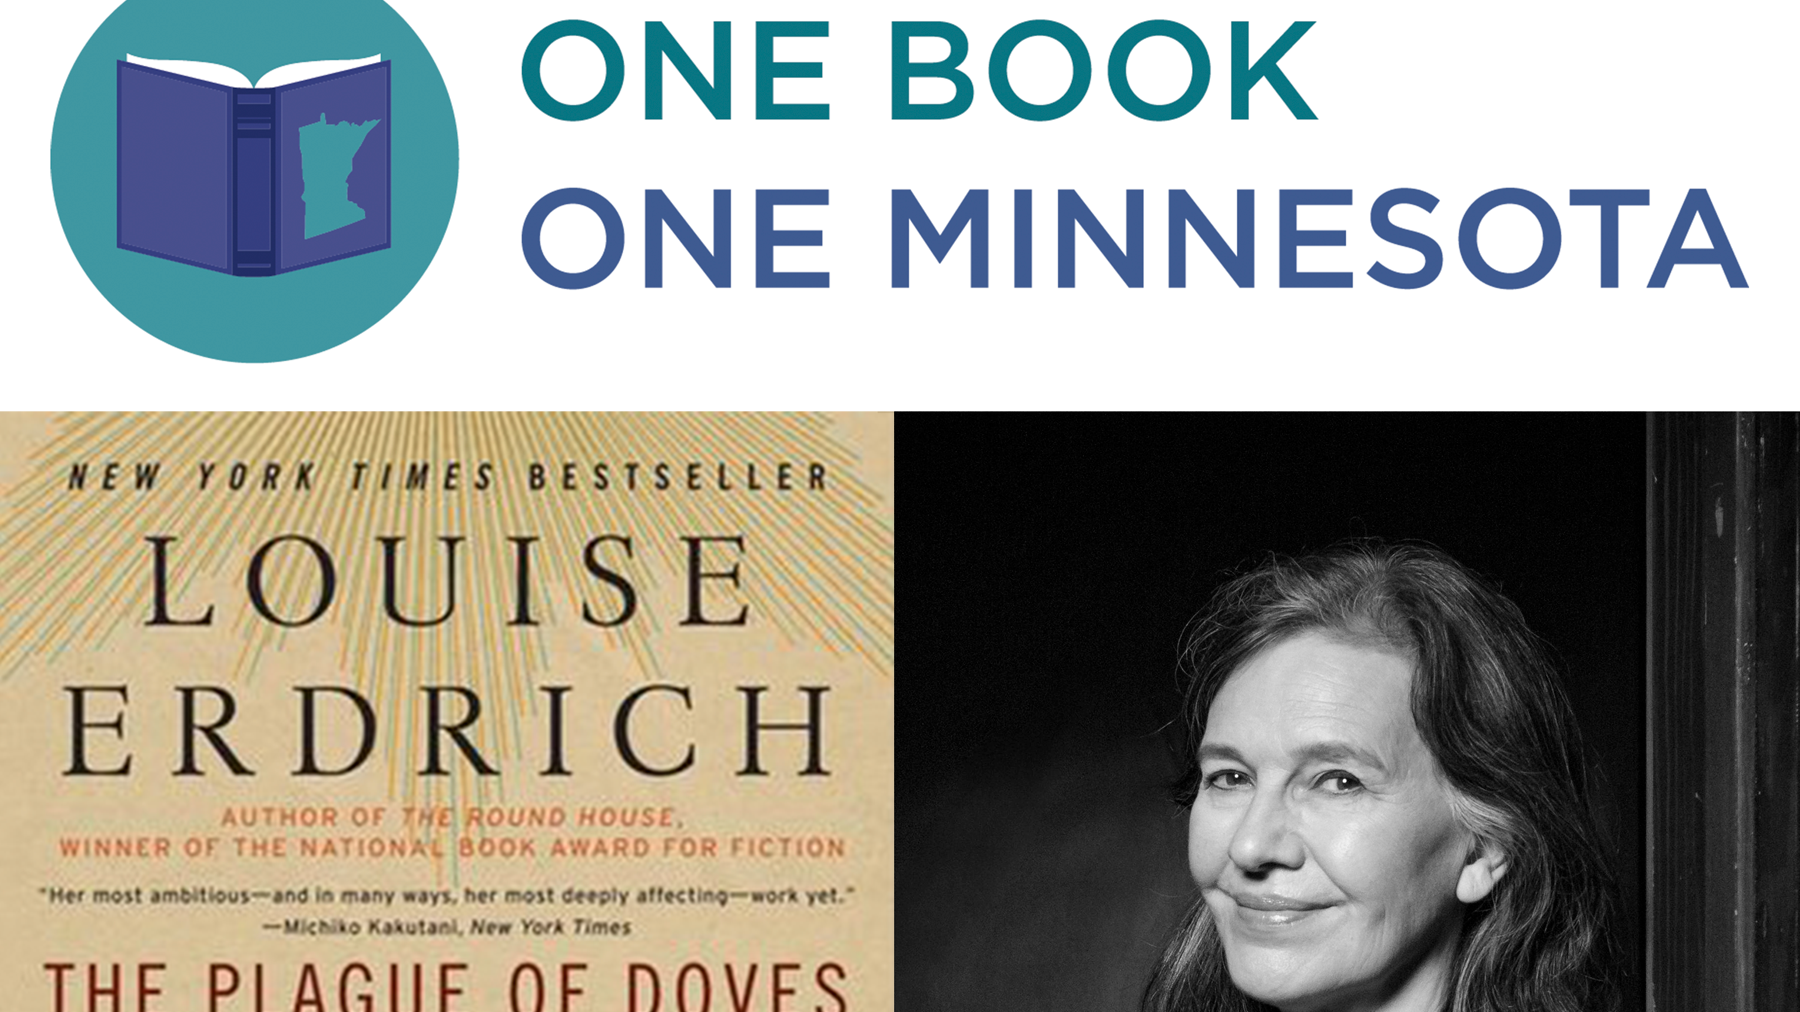 A photo collage of the One Book | One Minnesota logo, the cover of "The Plague of Doves," and a photo of Louise Erdrich.